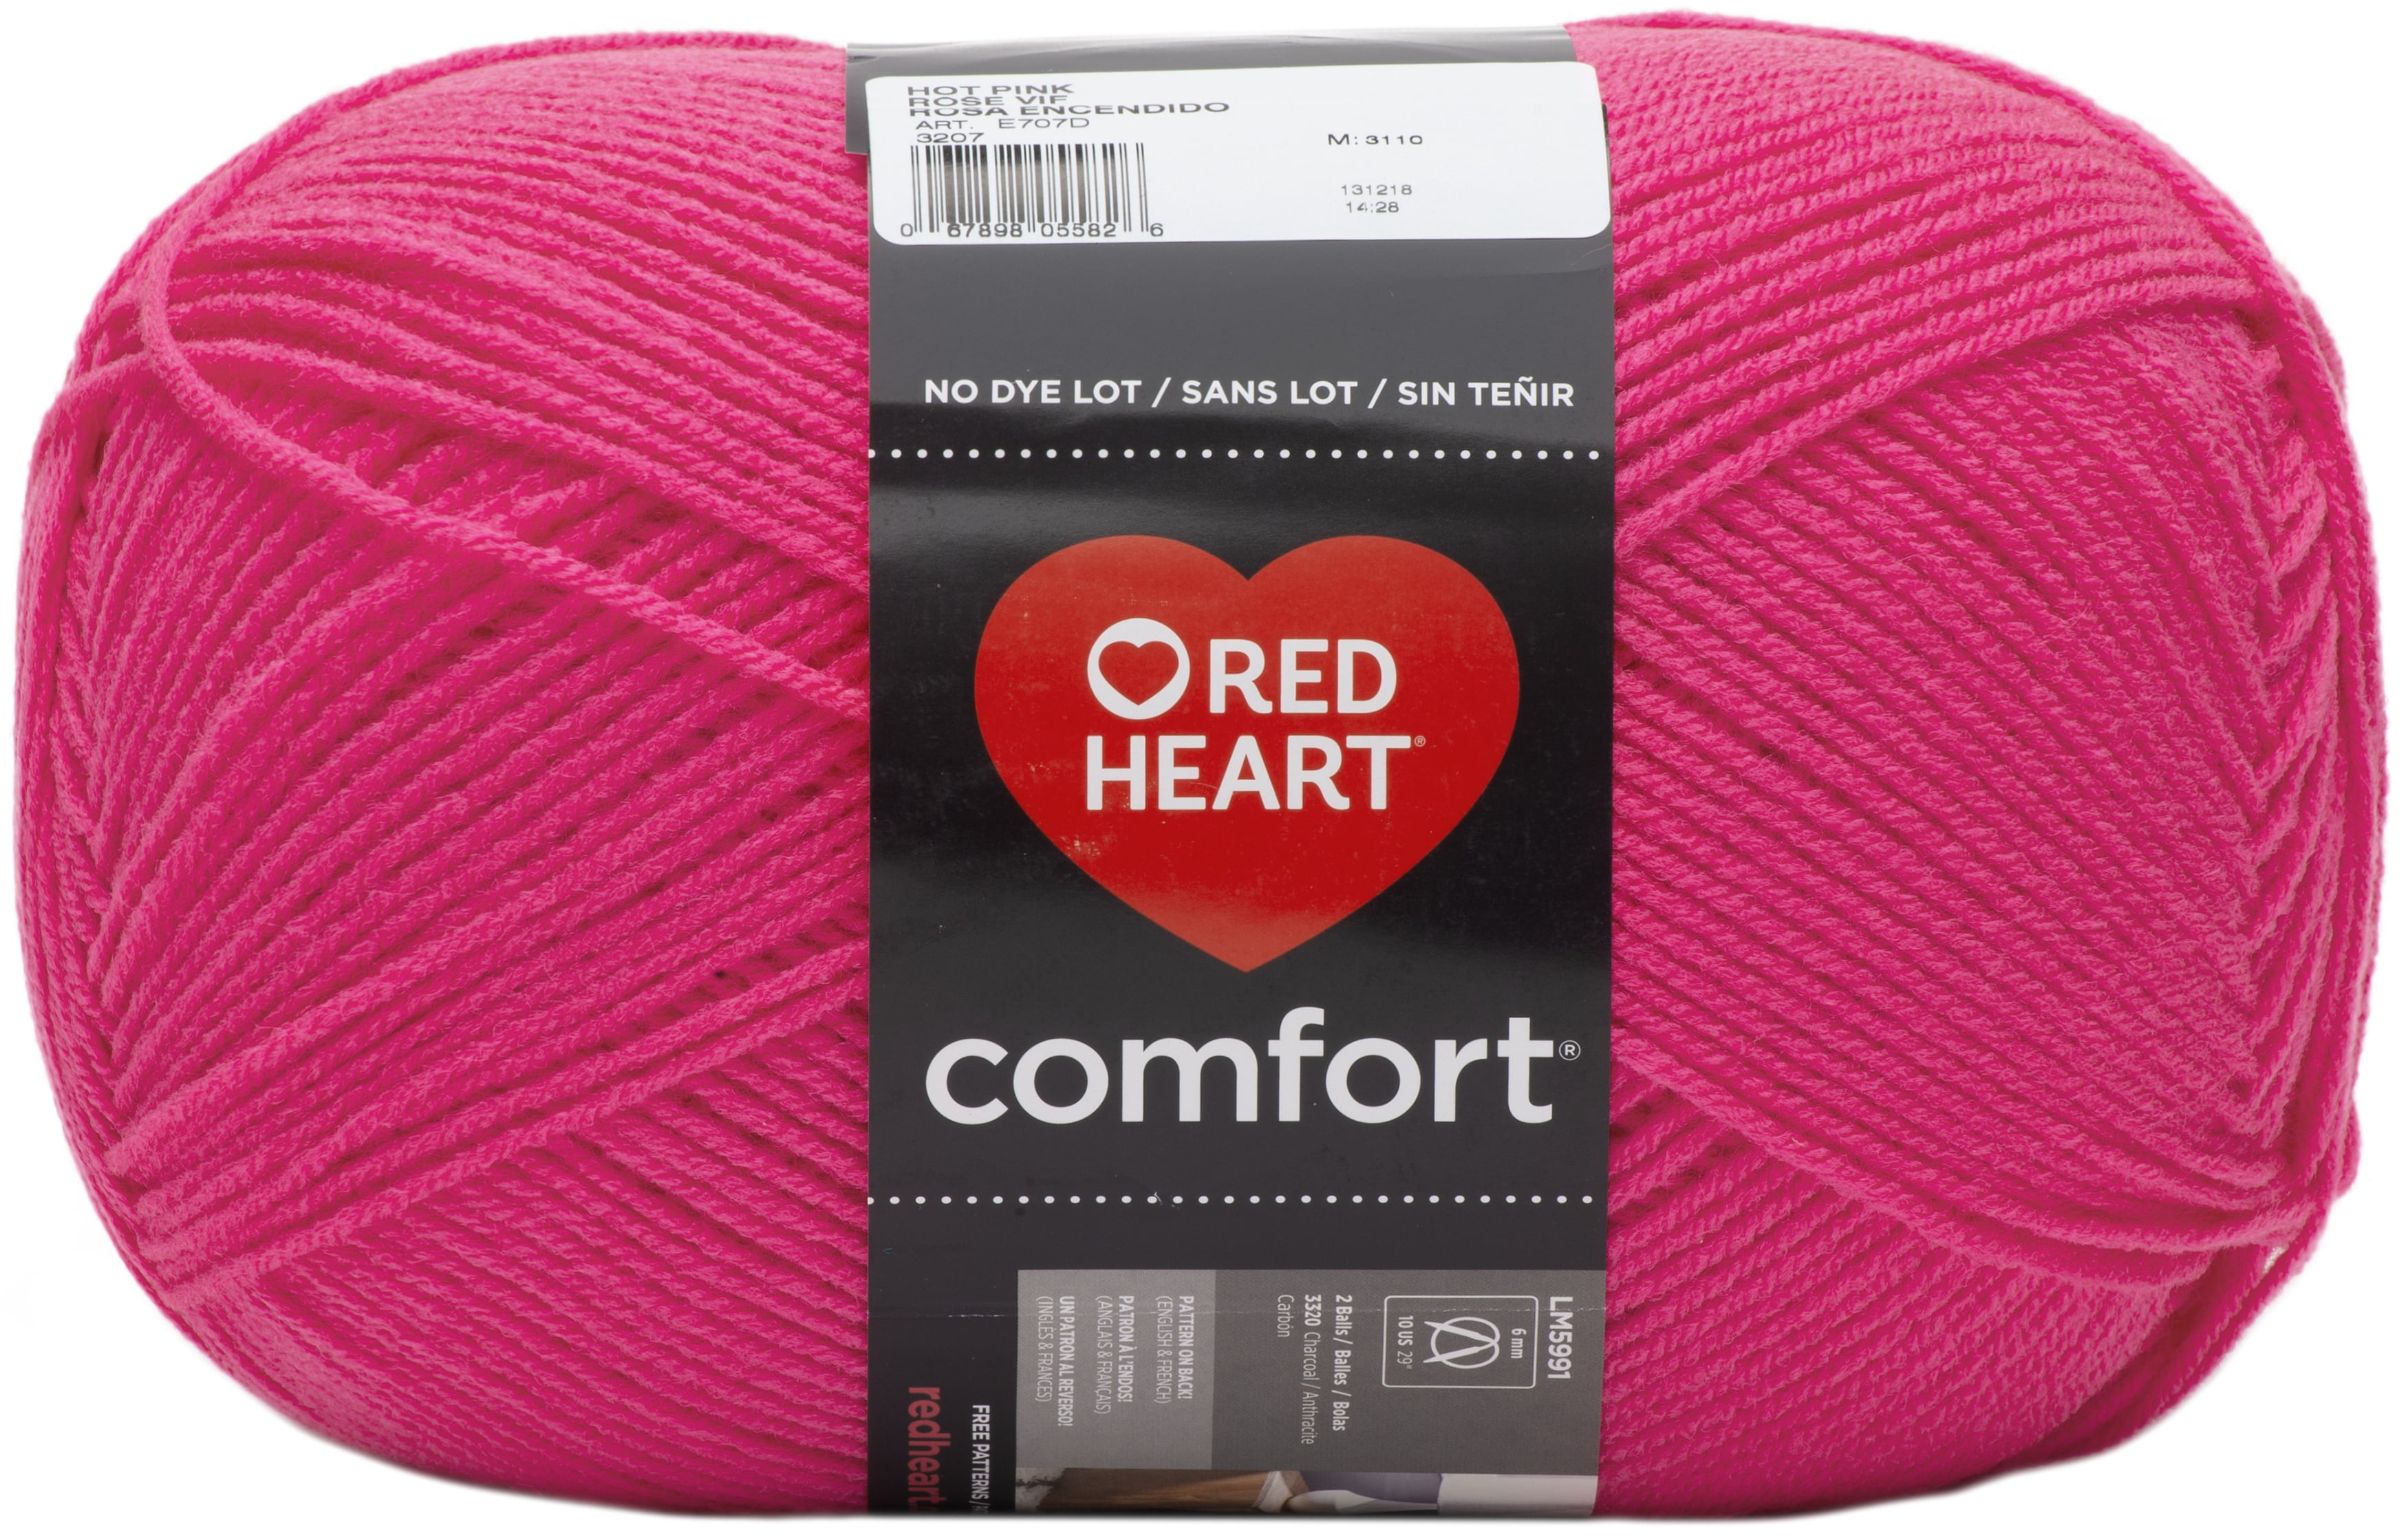  Pllieay 2x50g Packs Hot Pink and Red Yarn for